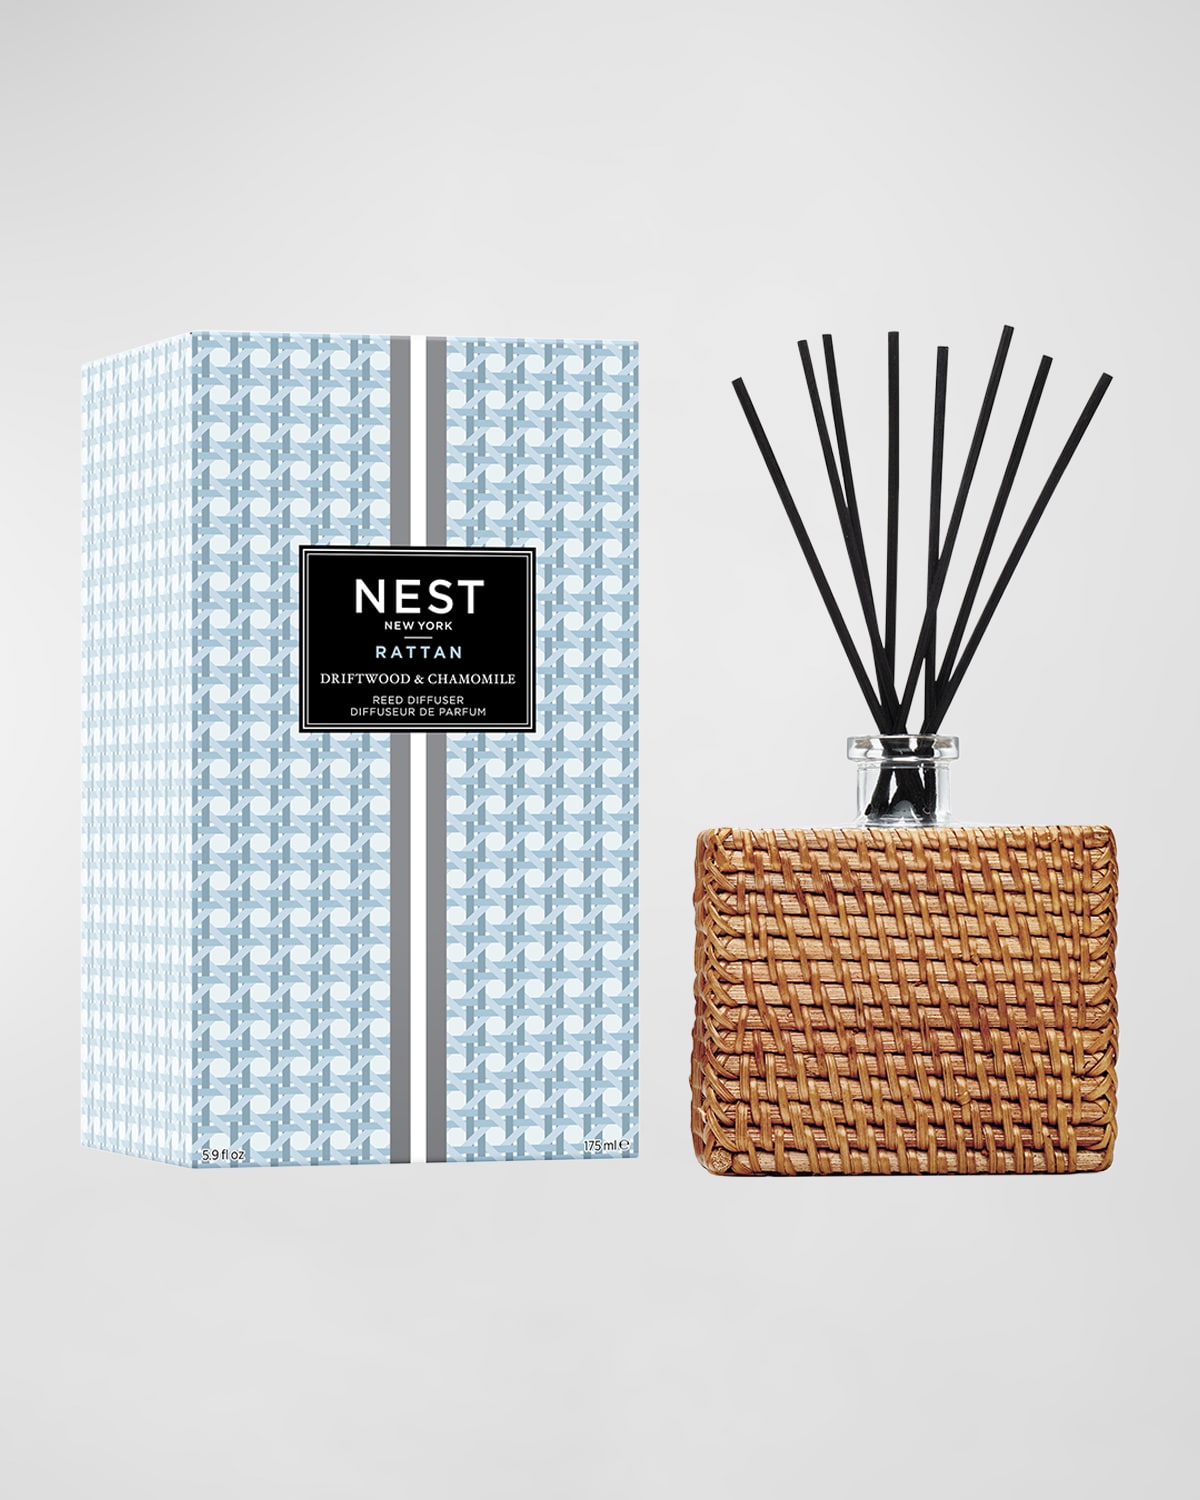 NEST NEW YORK RATTAN DRIFTWOOD AND CHAMOMILE REED DIFFUSER, 5.9 OZ. 